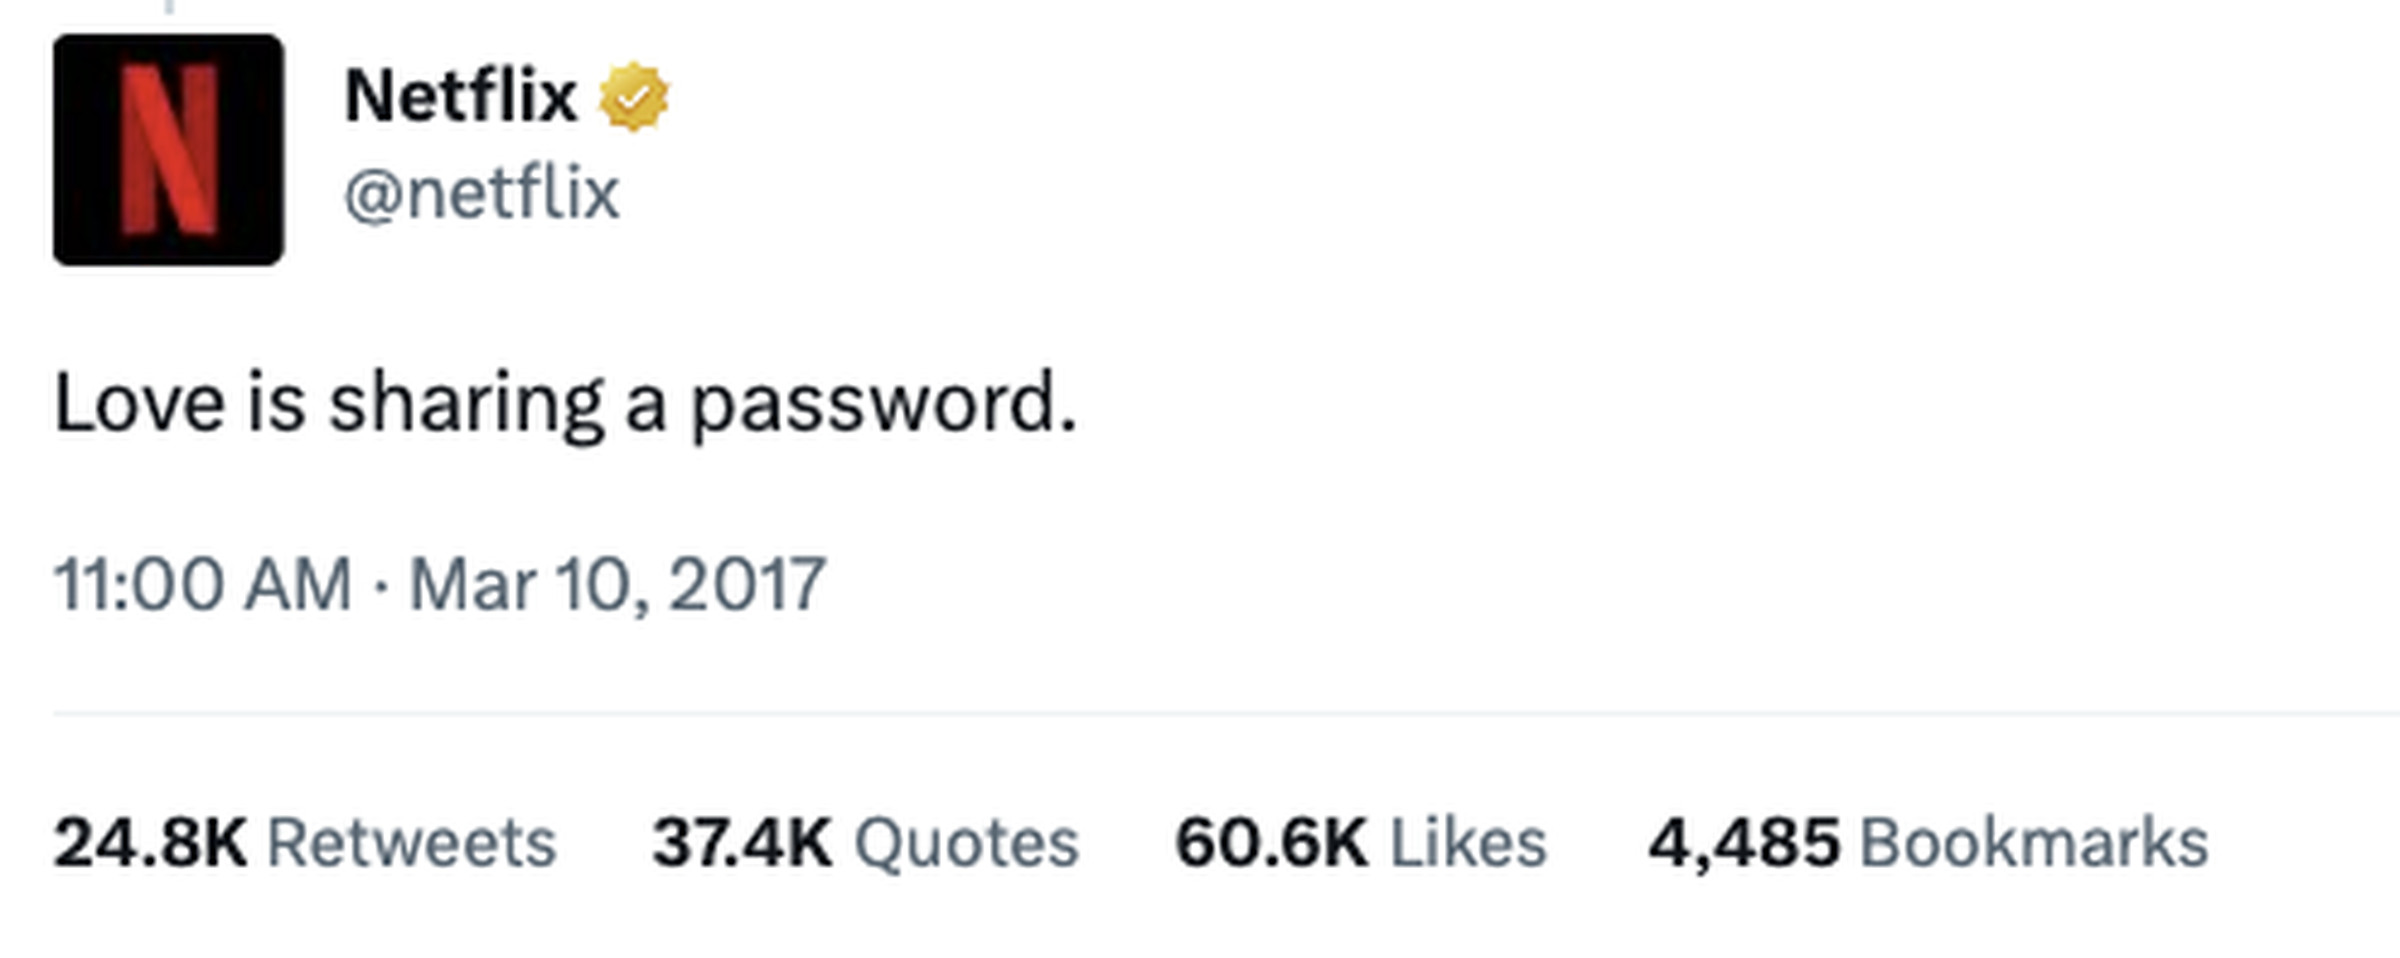 A March 10th, 2017 tweet from Netflix that reads “Love is sharing a password.”